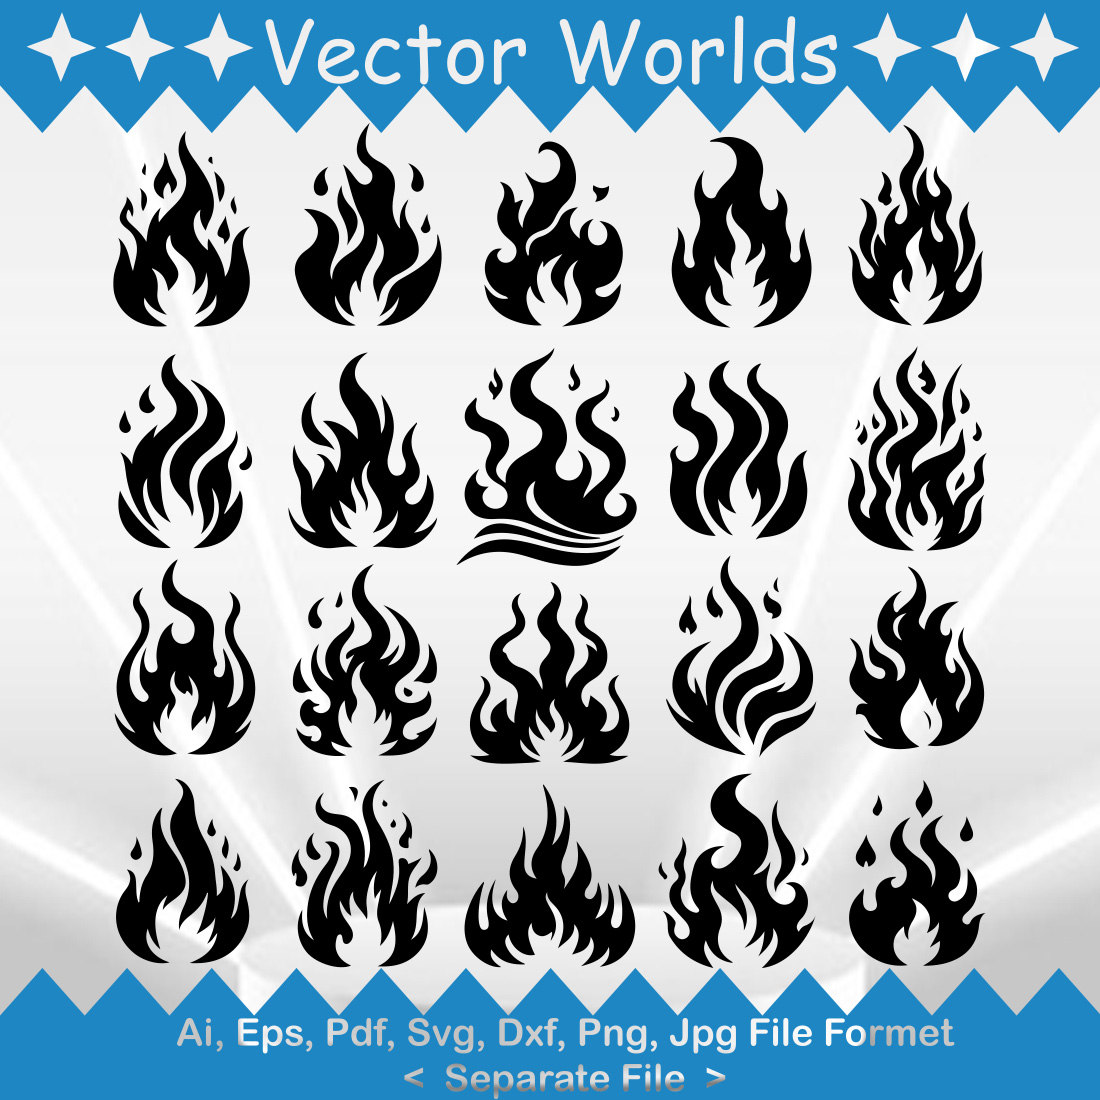 Burning Fire SVG Vector Design cover image.